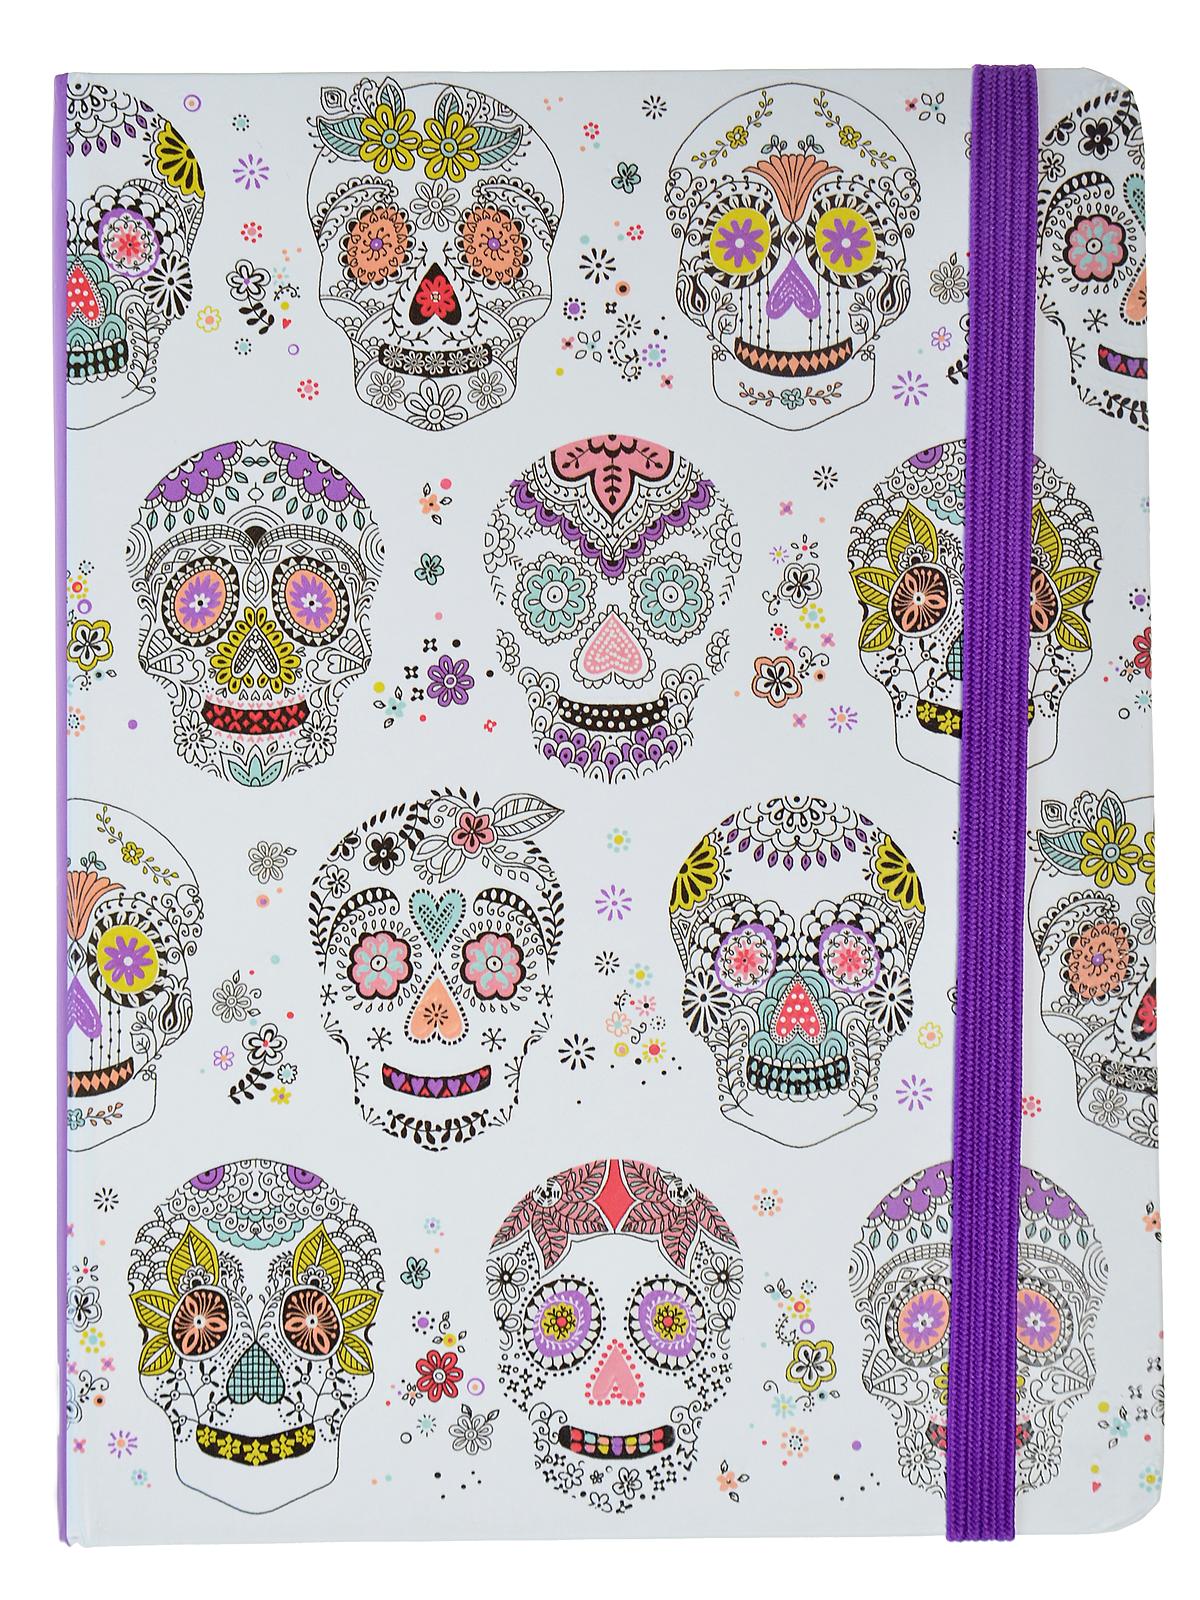 Mid-size Journals Sugar Skulls 6 1 4 In. X 8 1 4 In. 160 Pages, Lined